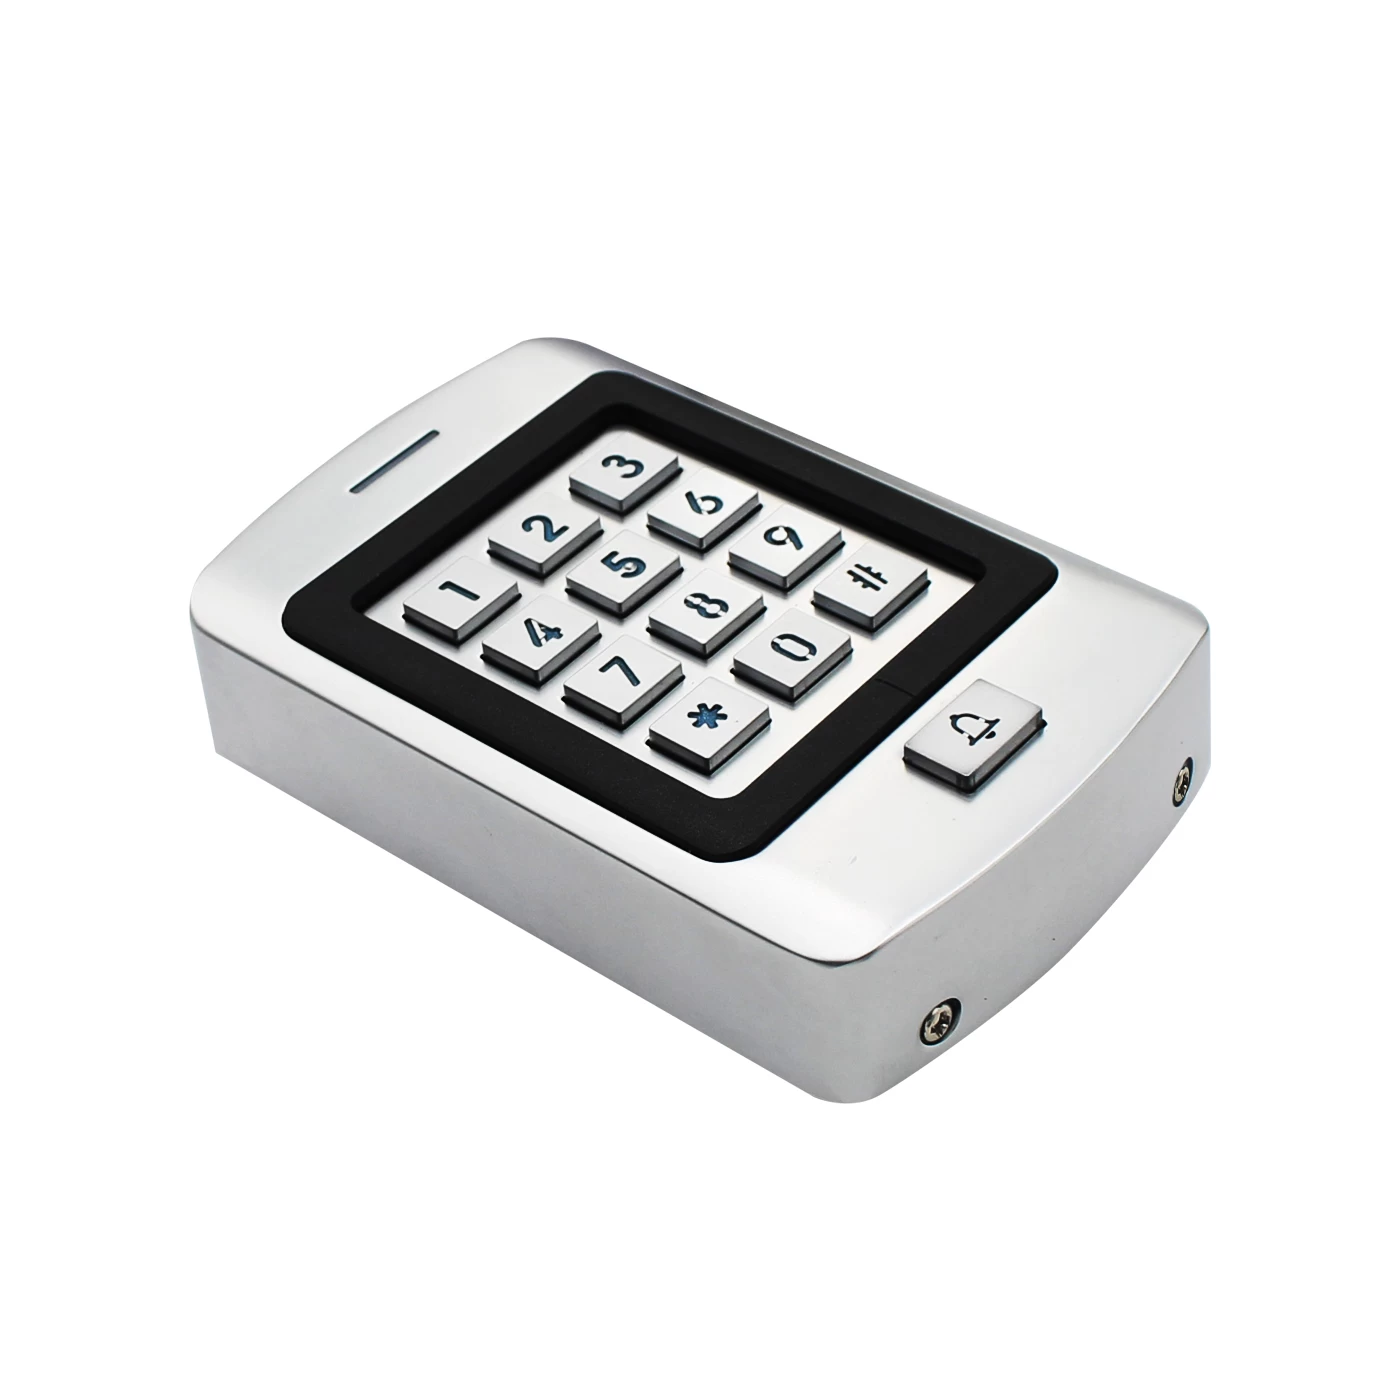 ACM-208D IP66 Metal 125KHz RFID Proximity Keypad Reader Access Control Keyboards with Doorbell